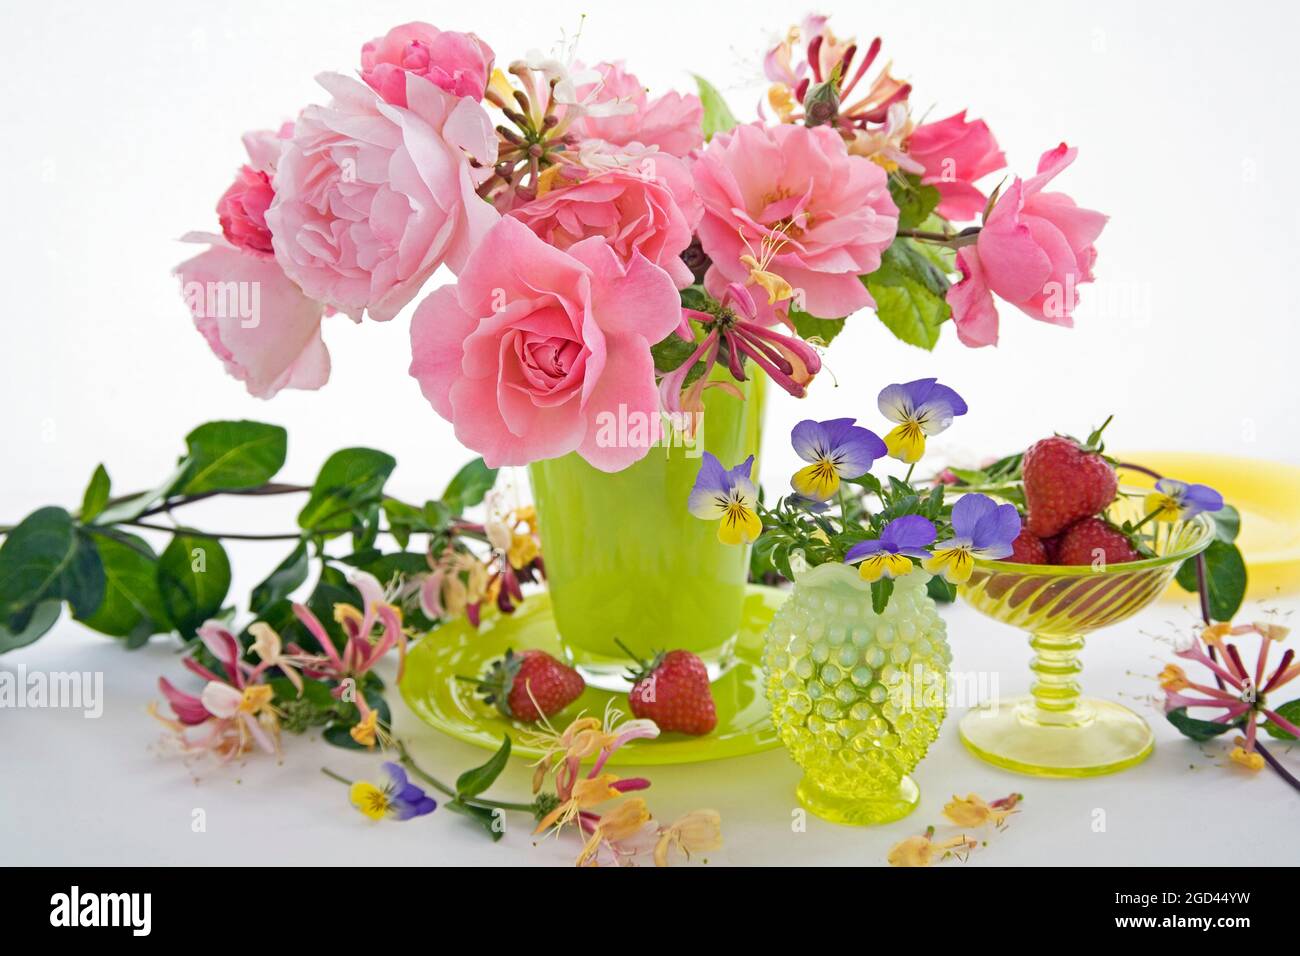 botany, roses, honeysuckle ( lonicera ) and pansies in yellow glass vases, ADDITIONAL-RIGHTS-CLEARANCE-INFO-NOT-AVAILABLE Stock Photo